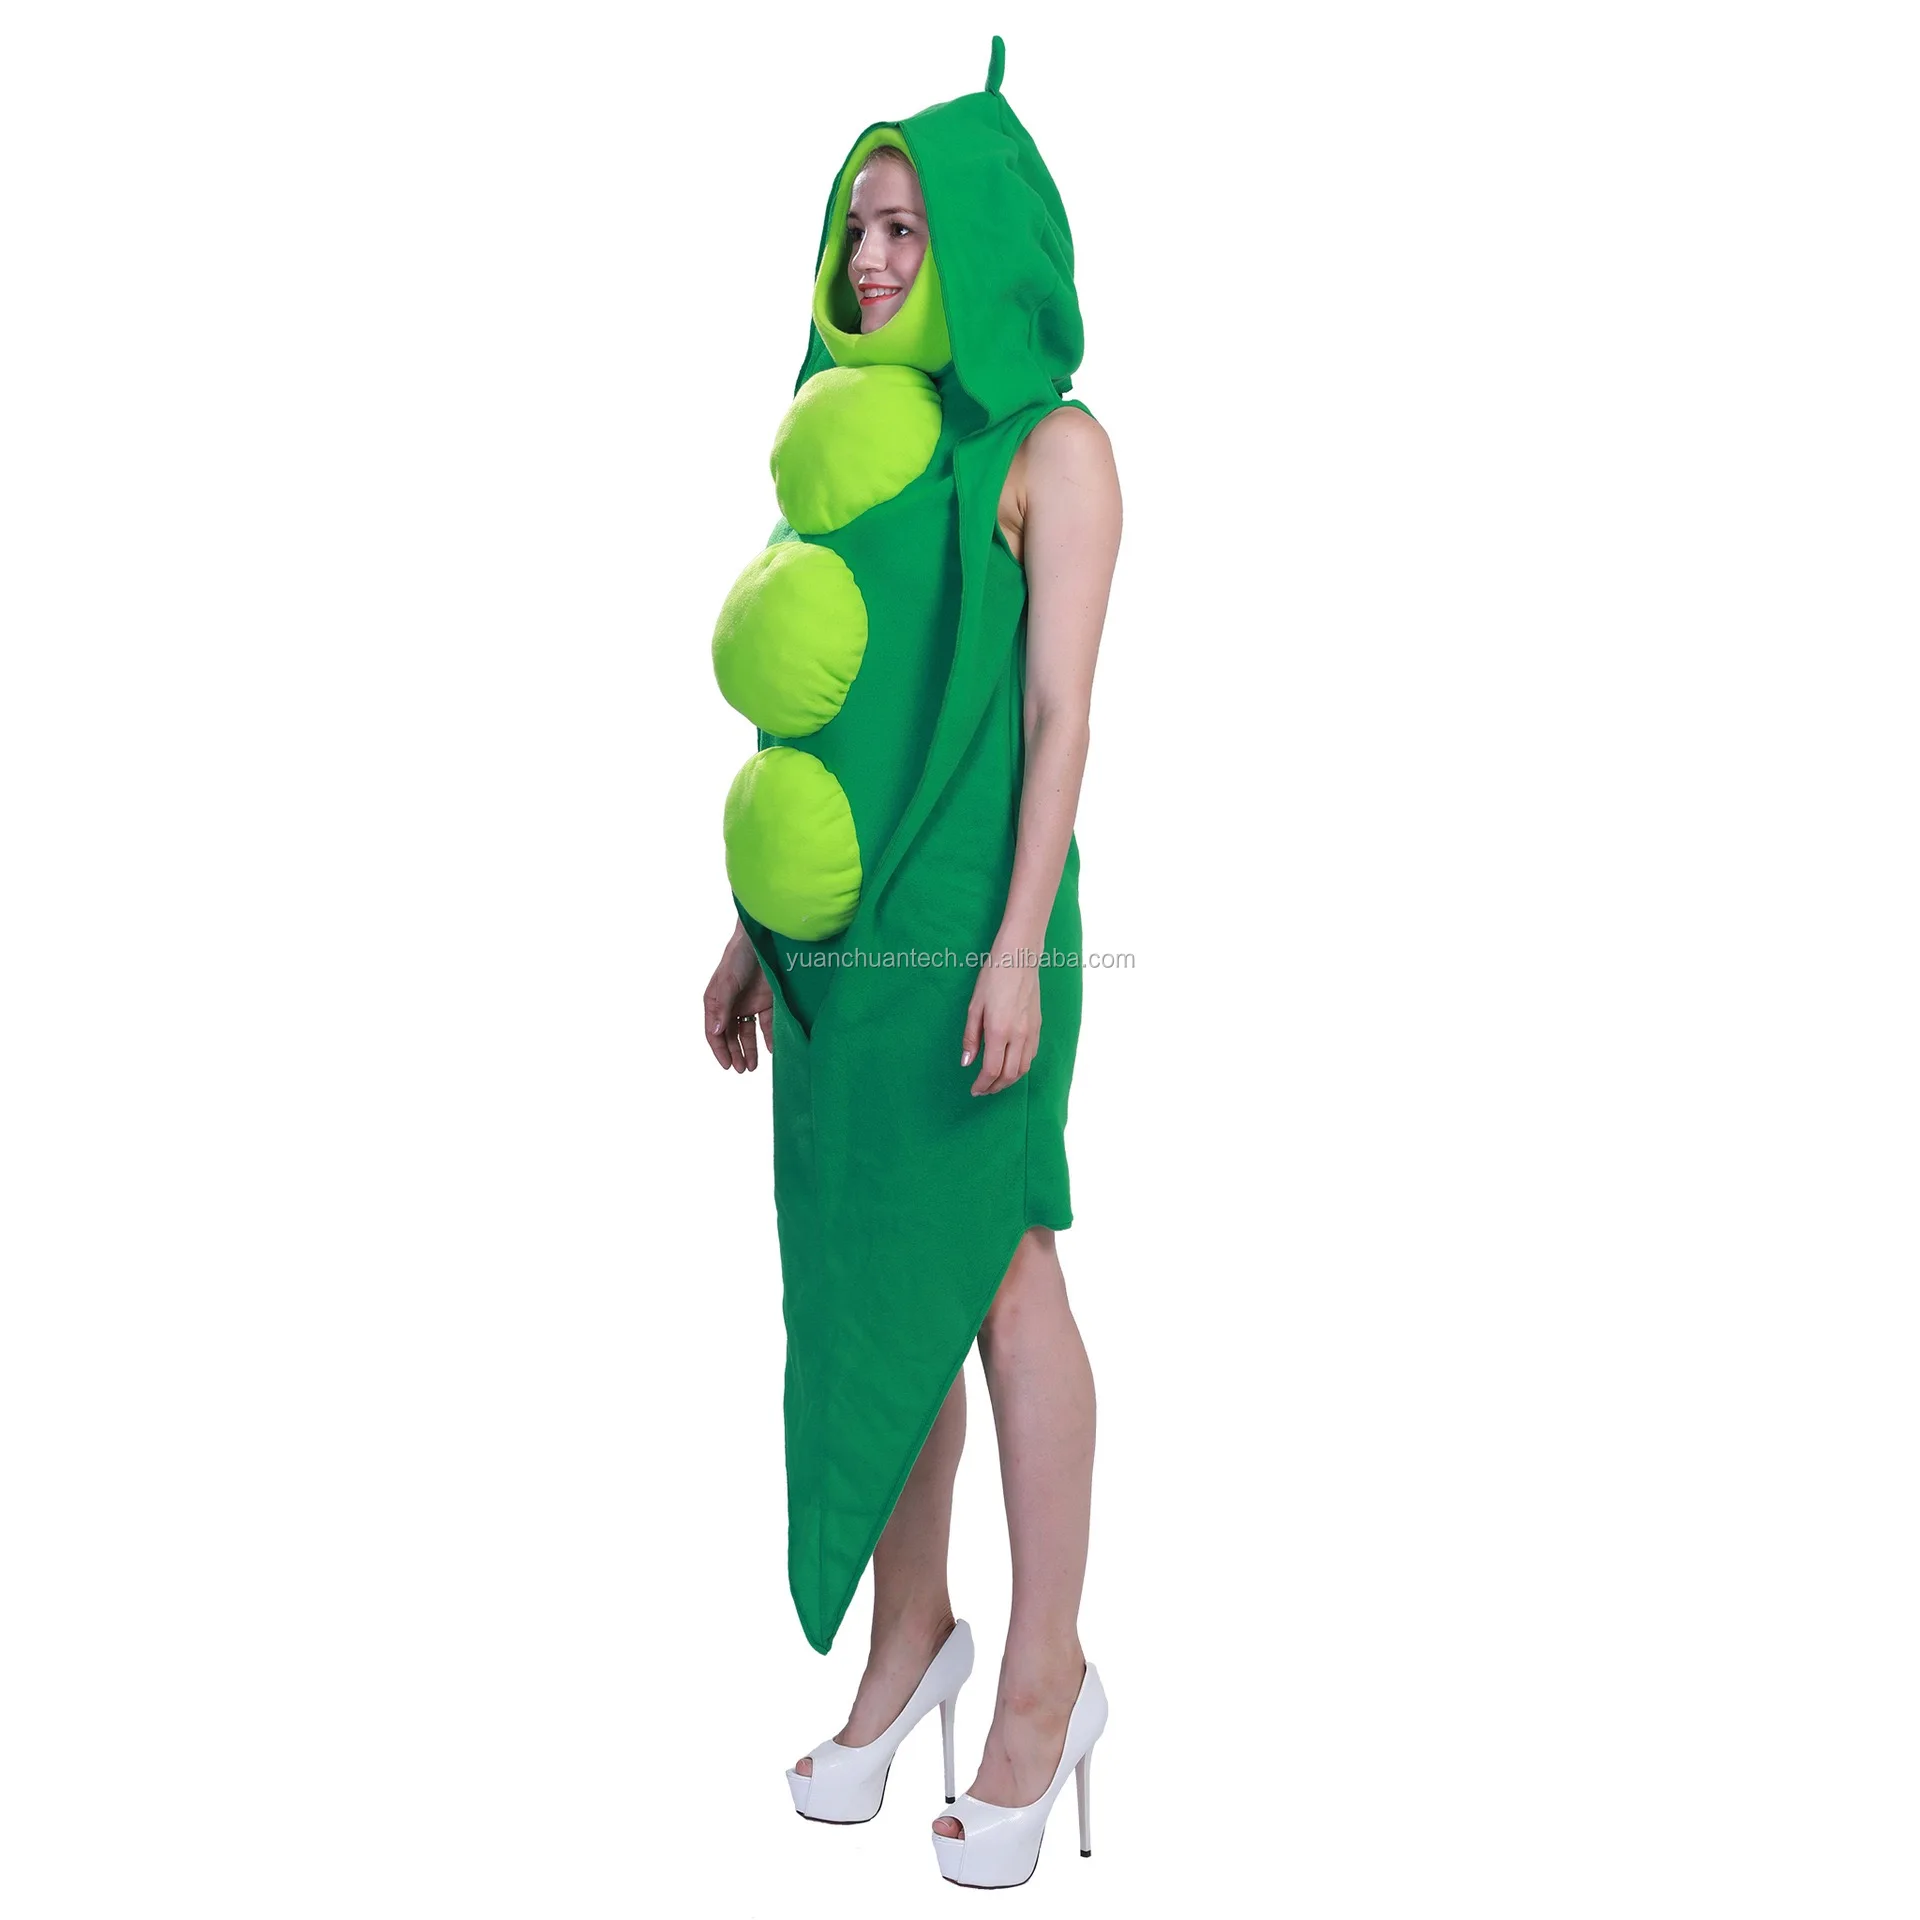 Adult Peas Halloween Costume Funny Cosplay Party Green Peas Costume